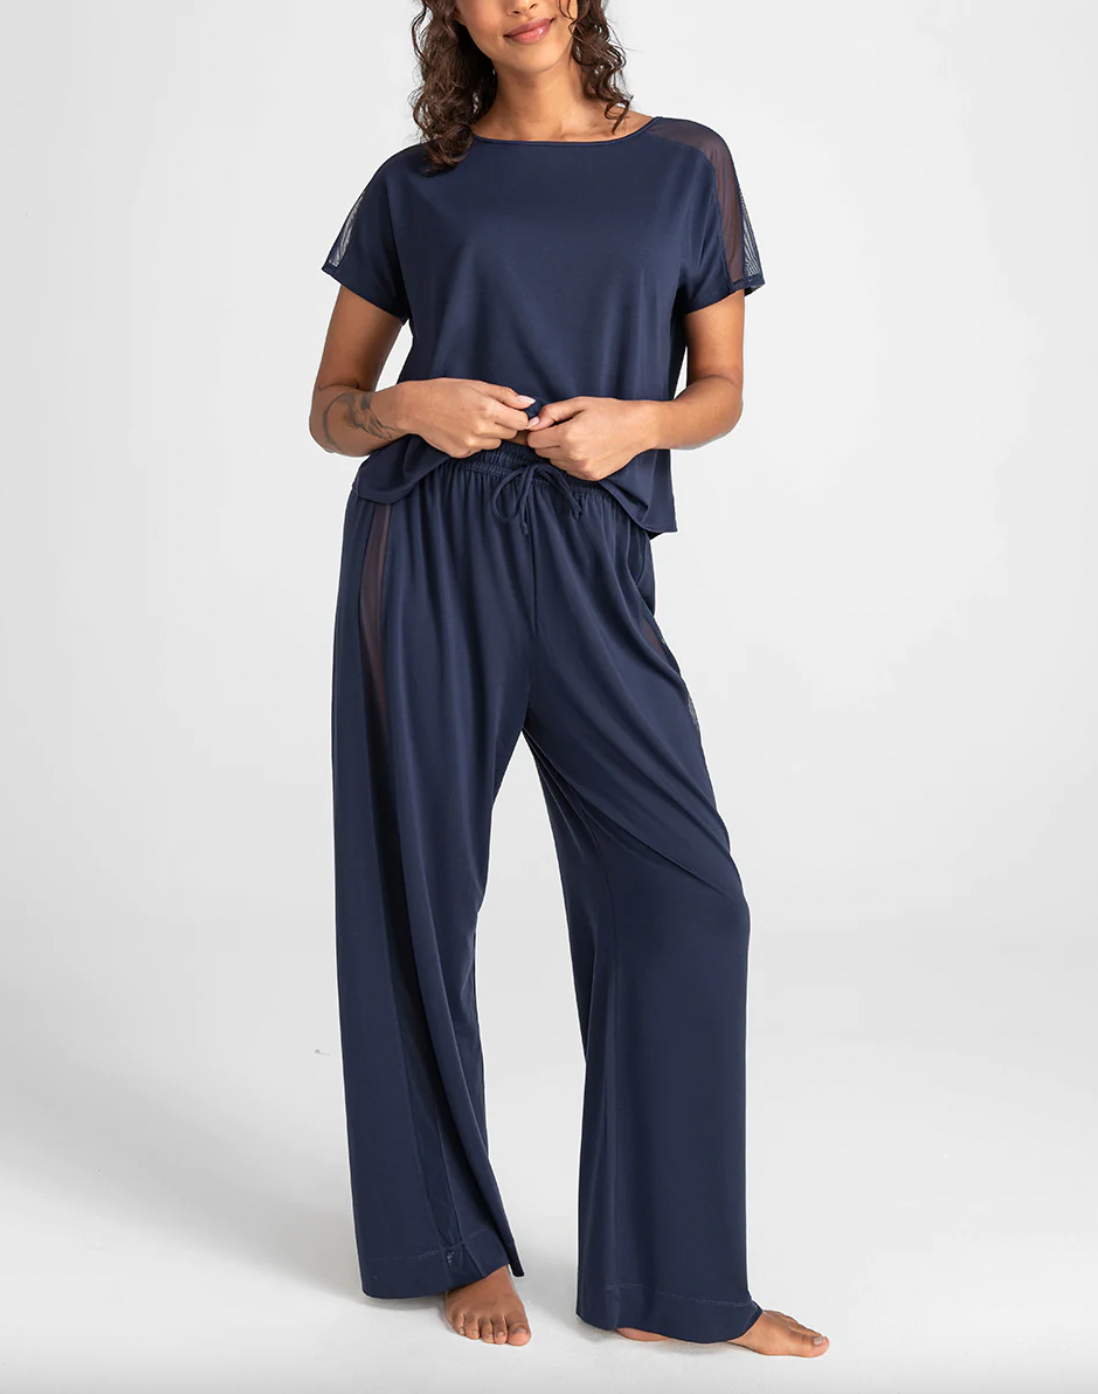 Ultra-Chic Pyjama Sets That Double As Workwear